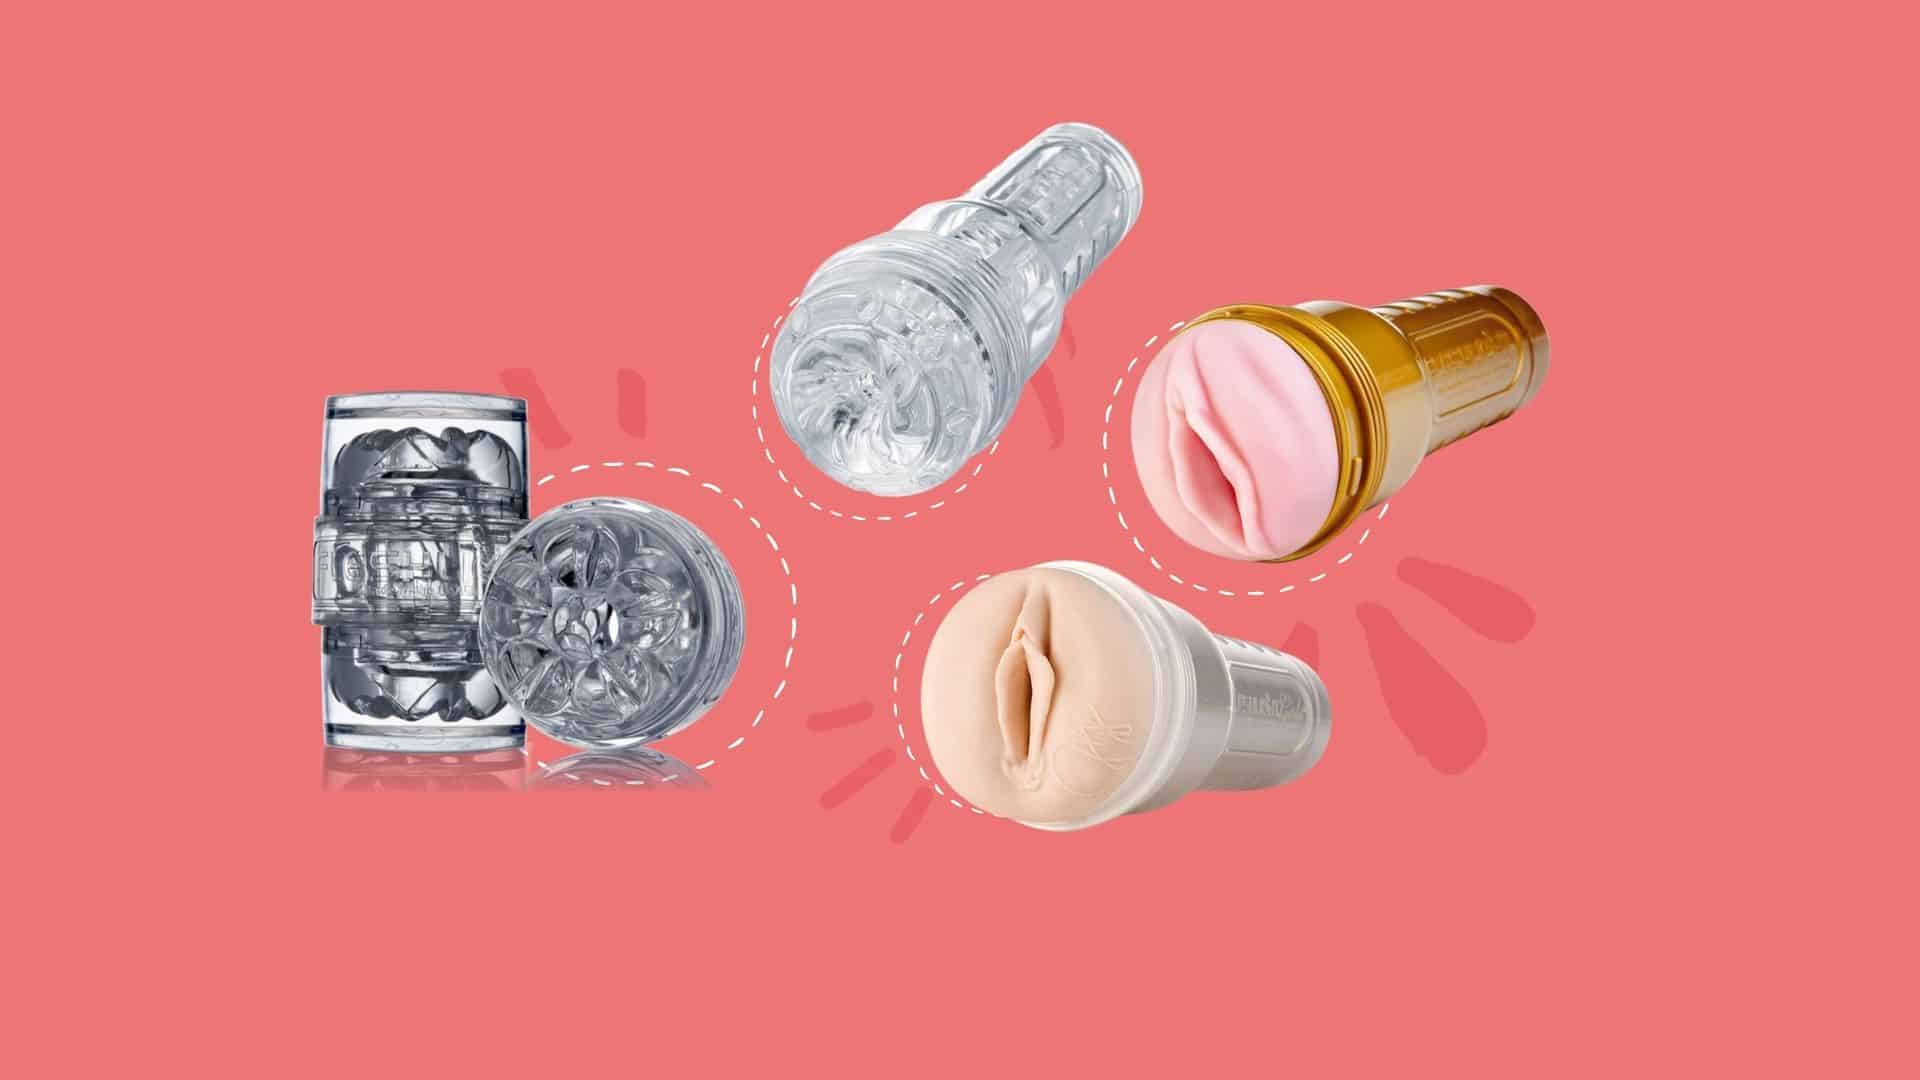 13 Tightest Fleshlights For the Most Intense Experience